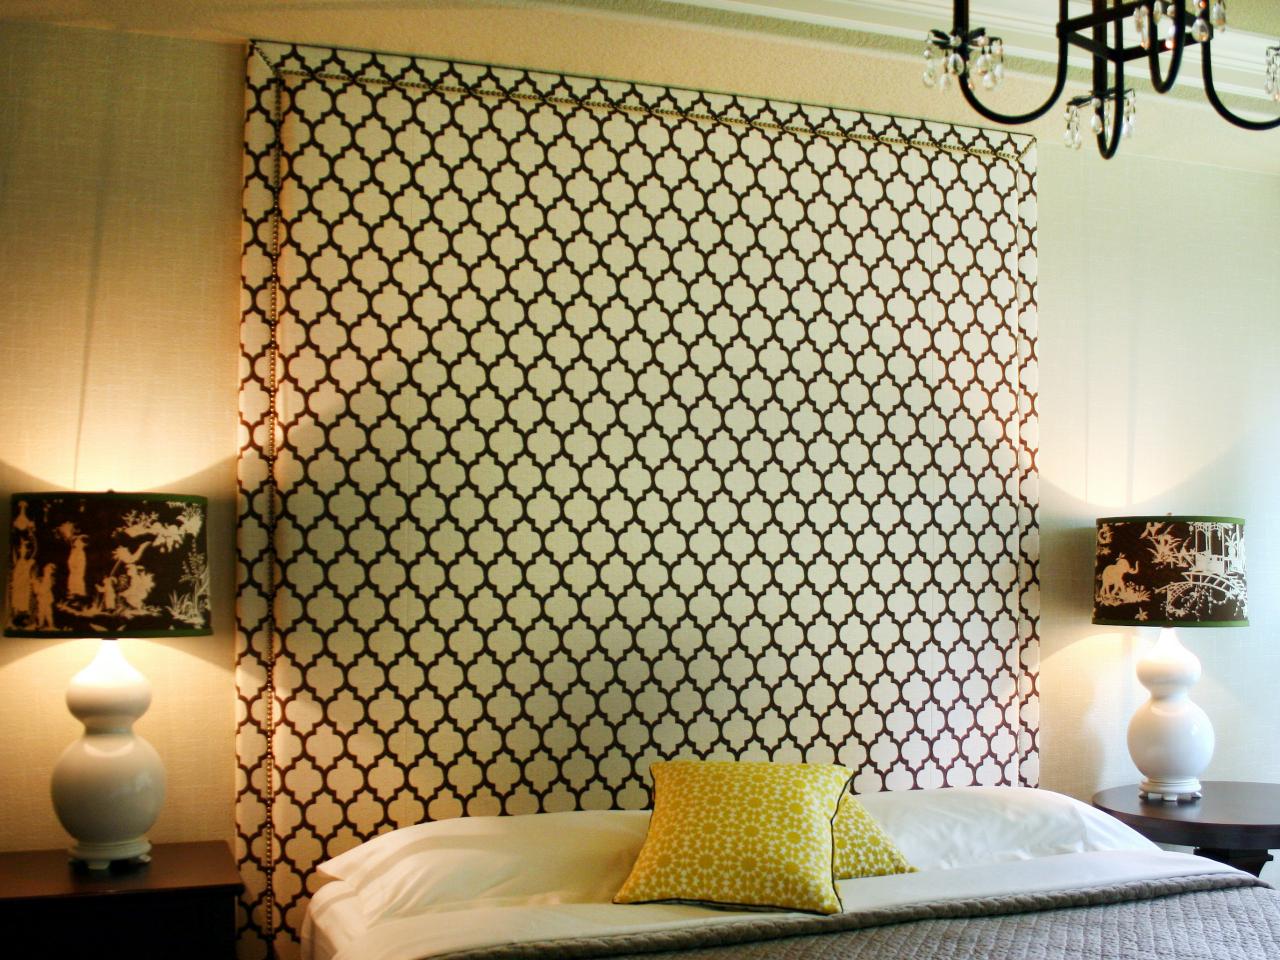 Upholstered Headboard With Nail Head, How To Make An Upholstered Headboard For A King Size Bed